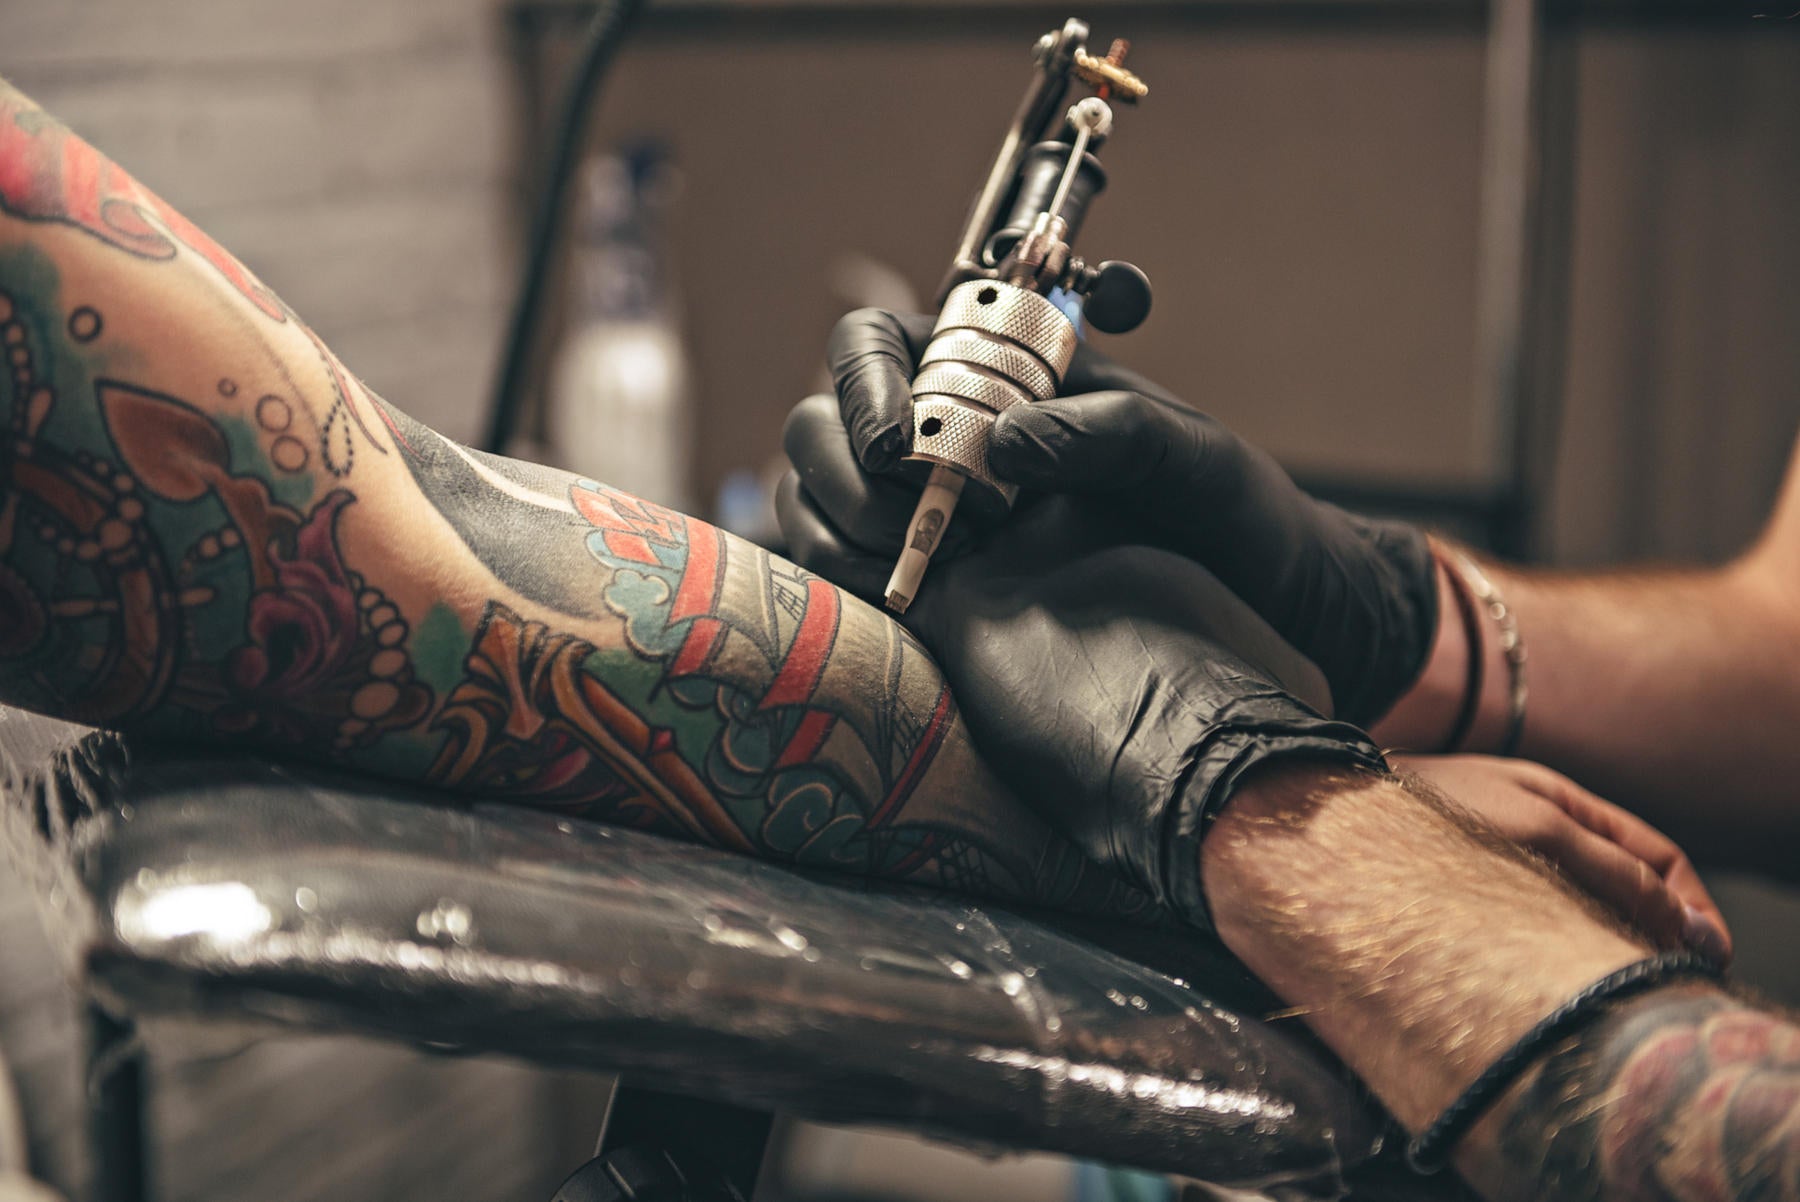 Tattoo artist tattooing a full color sleeve tattoo on persons arm